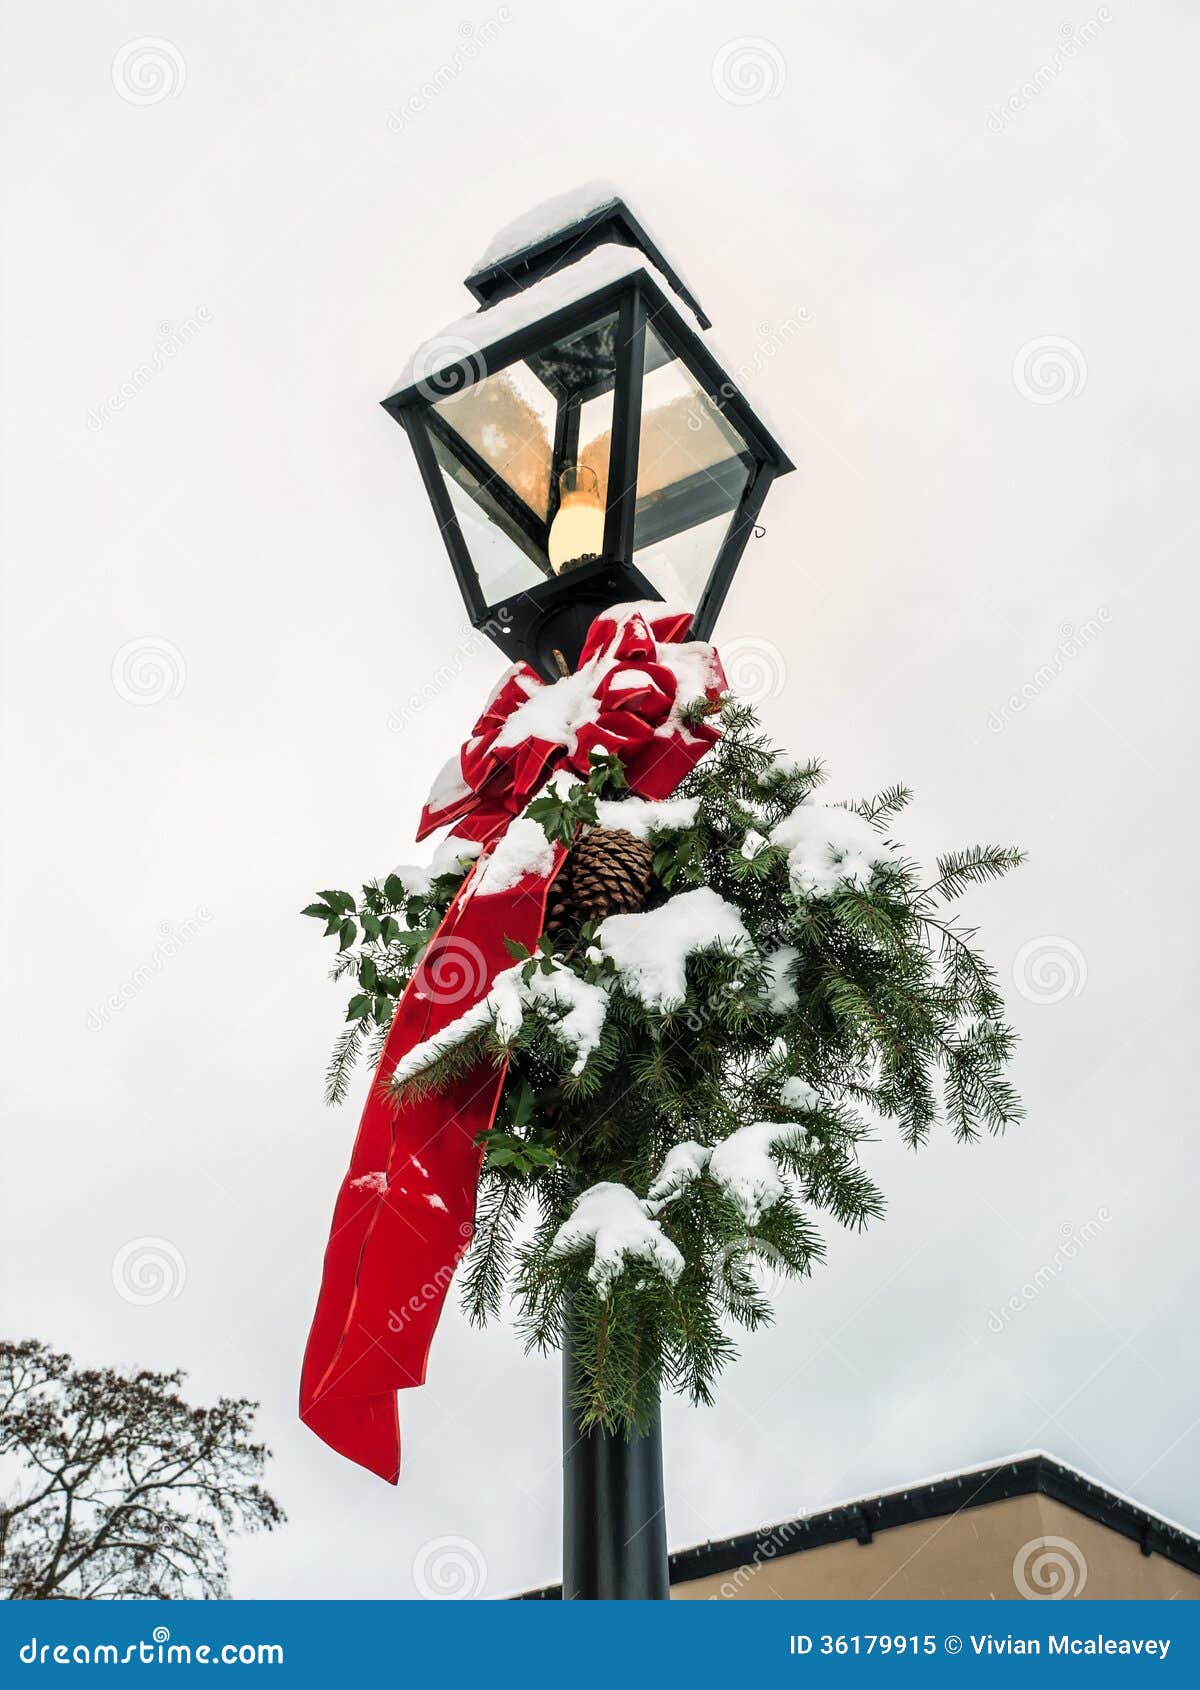 Lamp Post With Christmas Decoration Royalty Free Stock Photo ...